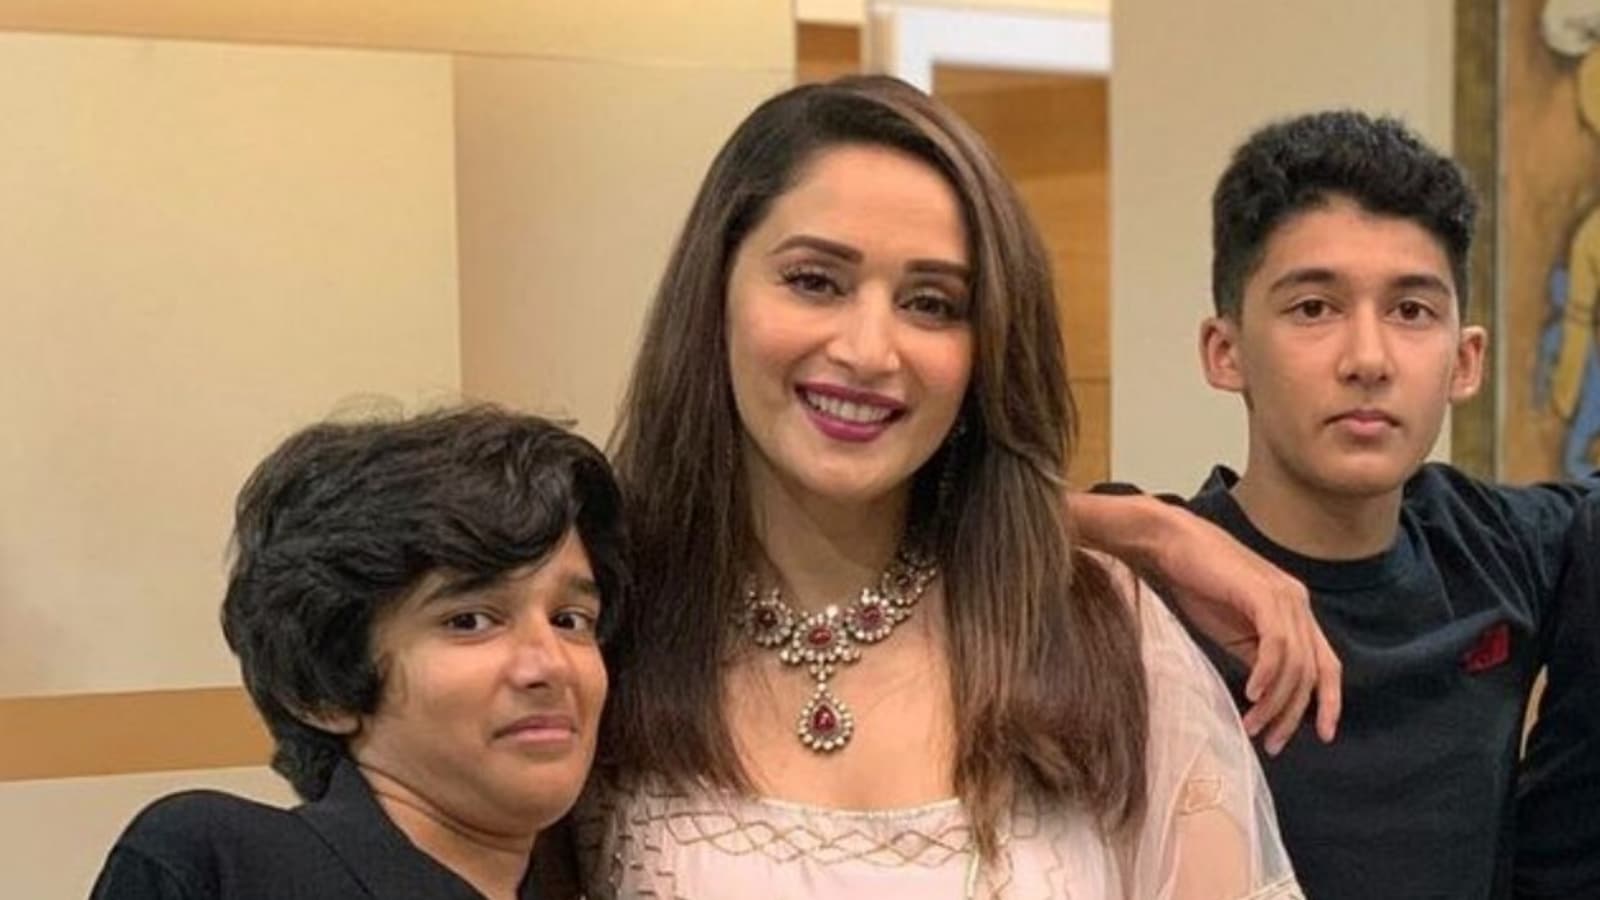 Madhuri Dixit Xxxcom - Madhuri Dixit recalls when her son's friend said: 'You're lucky she is your  mom' | Bollywood - Hindustan Times